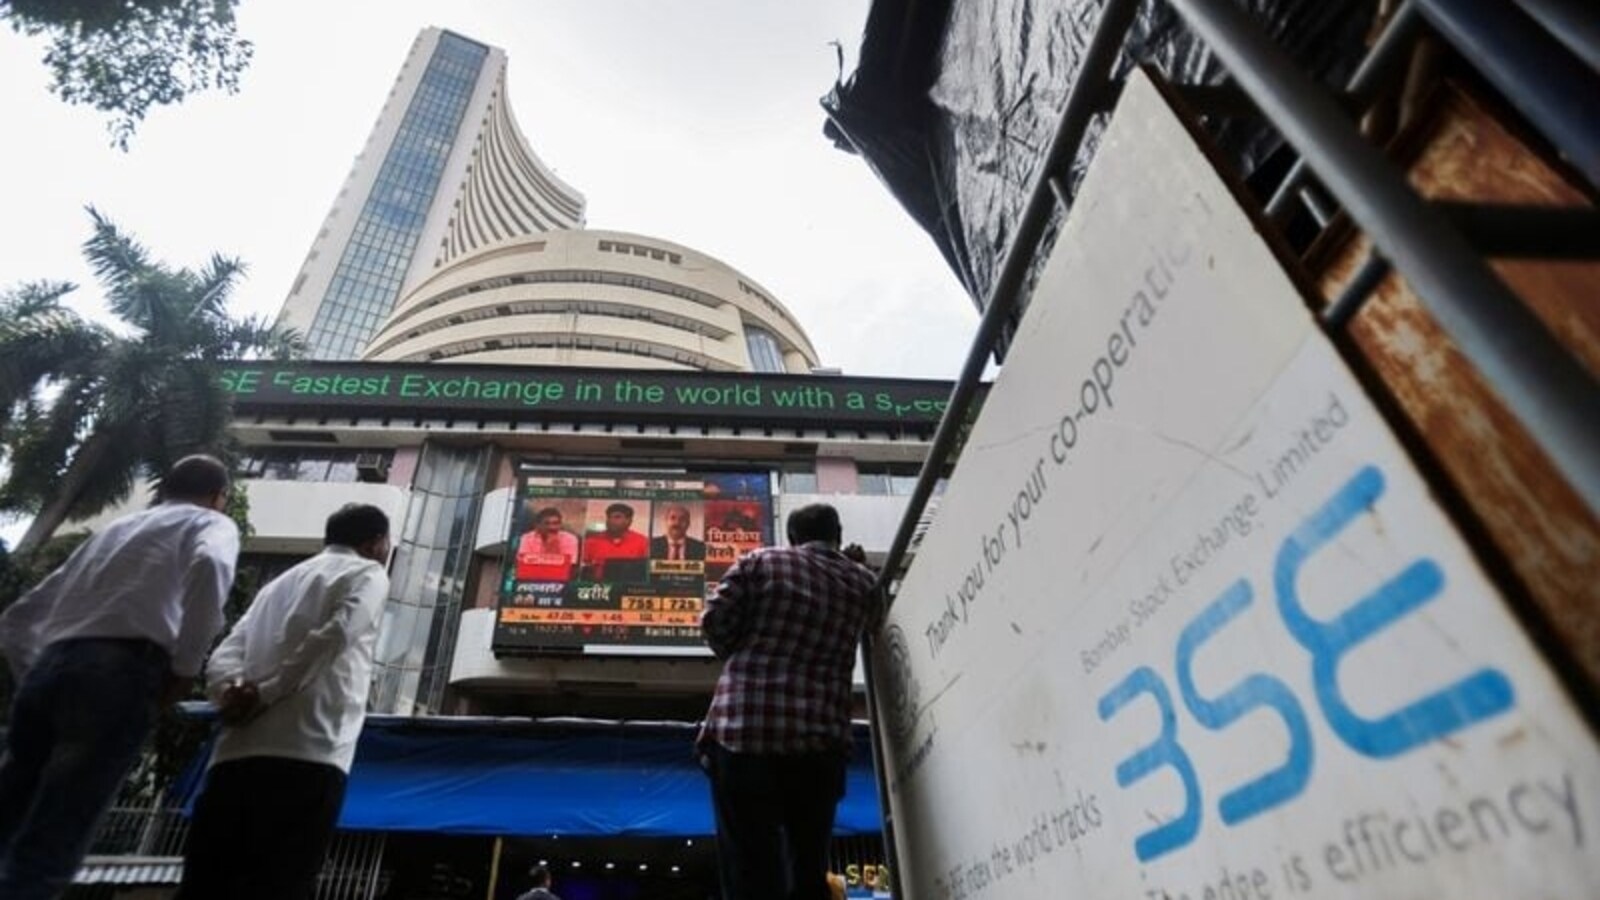 Sensex gains 180 points, at 54,453 in early trade; Nifty above 16,210